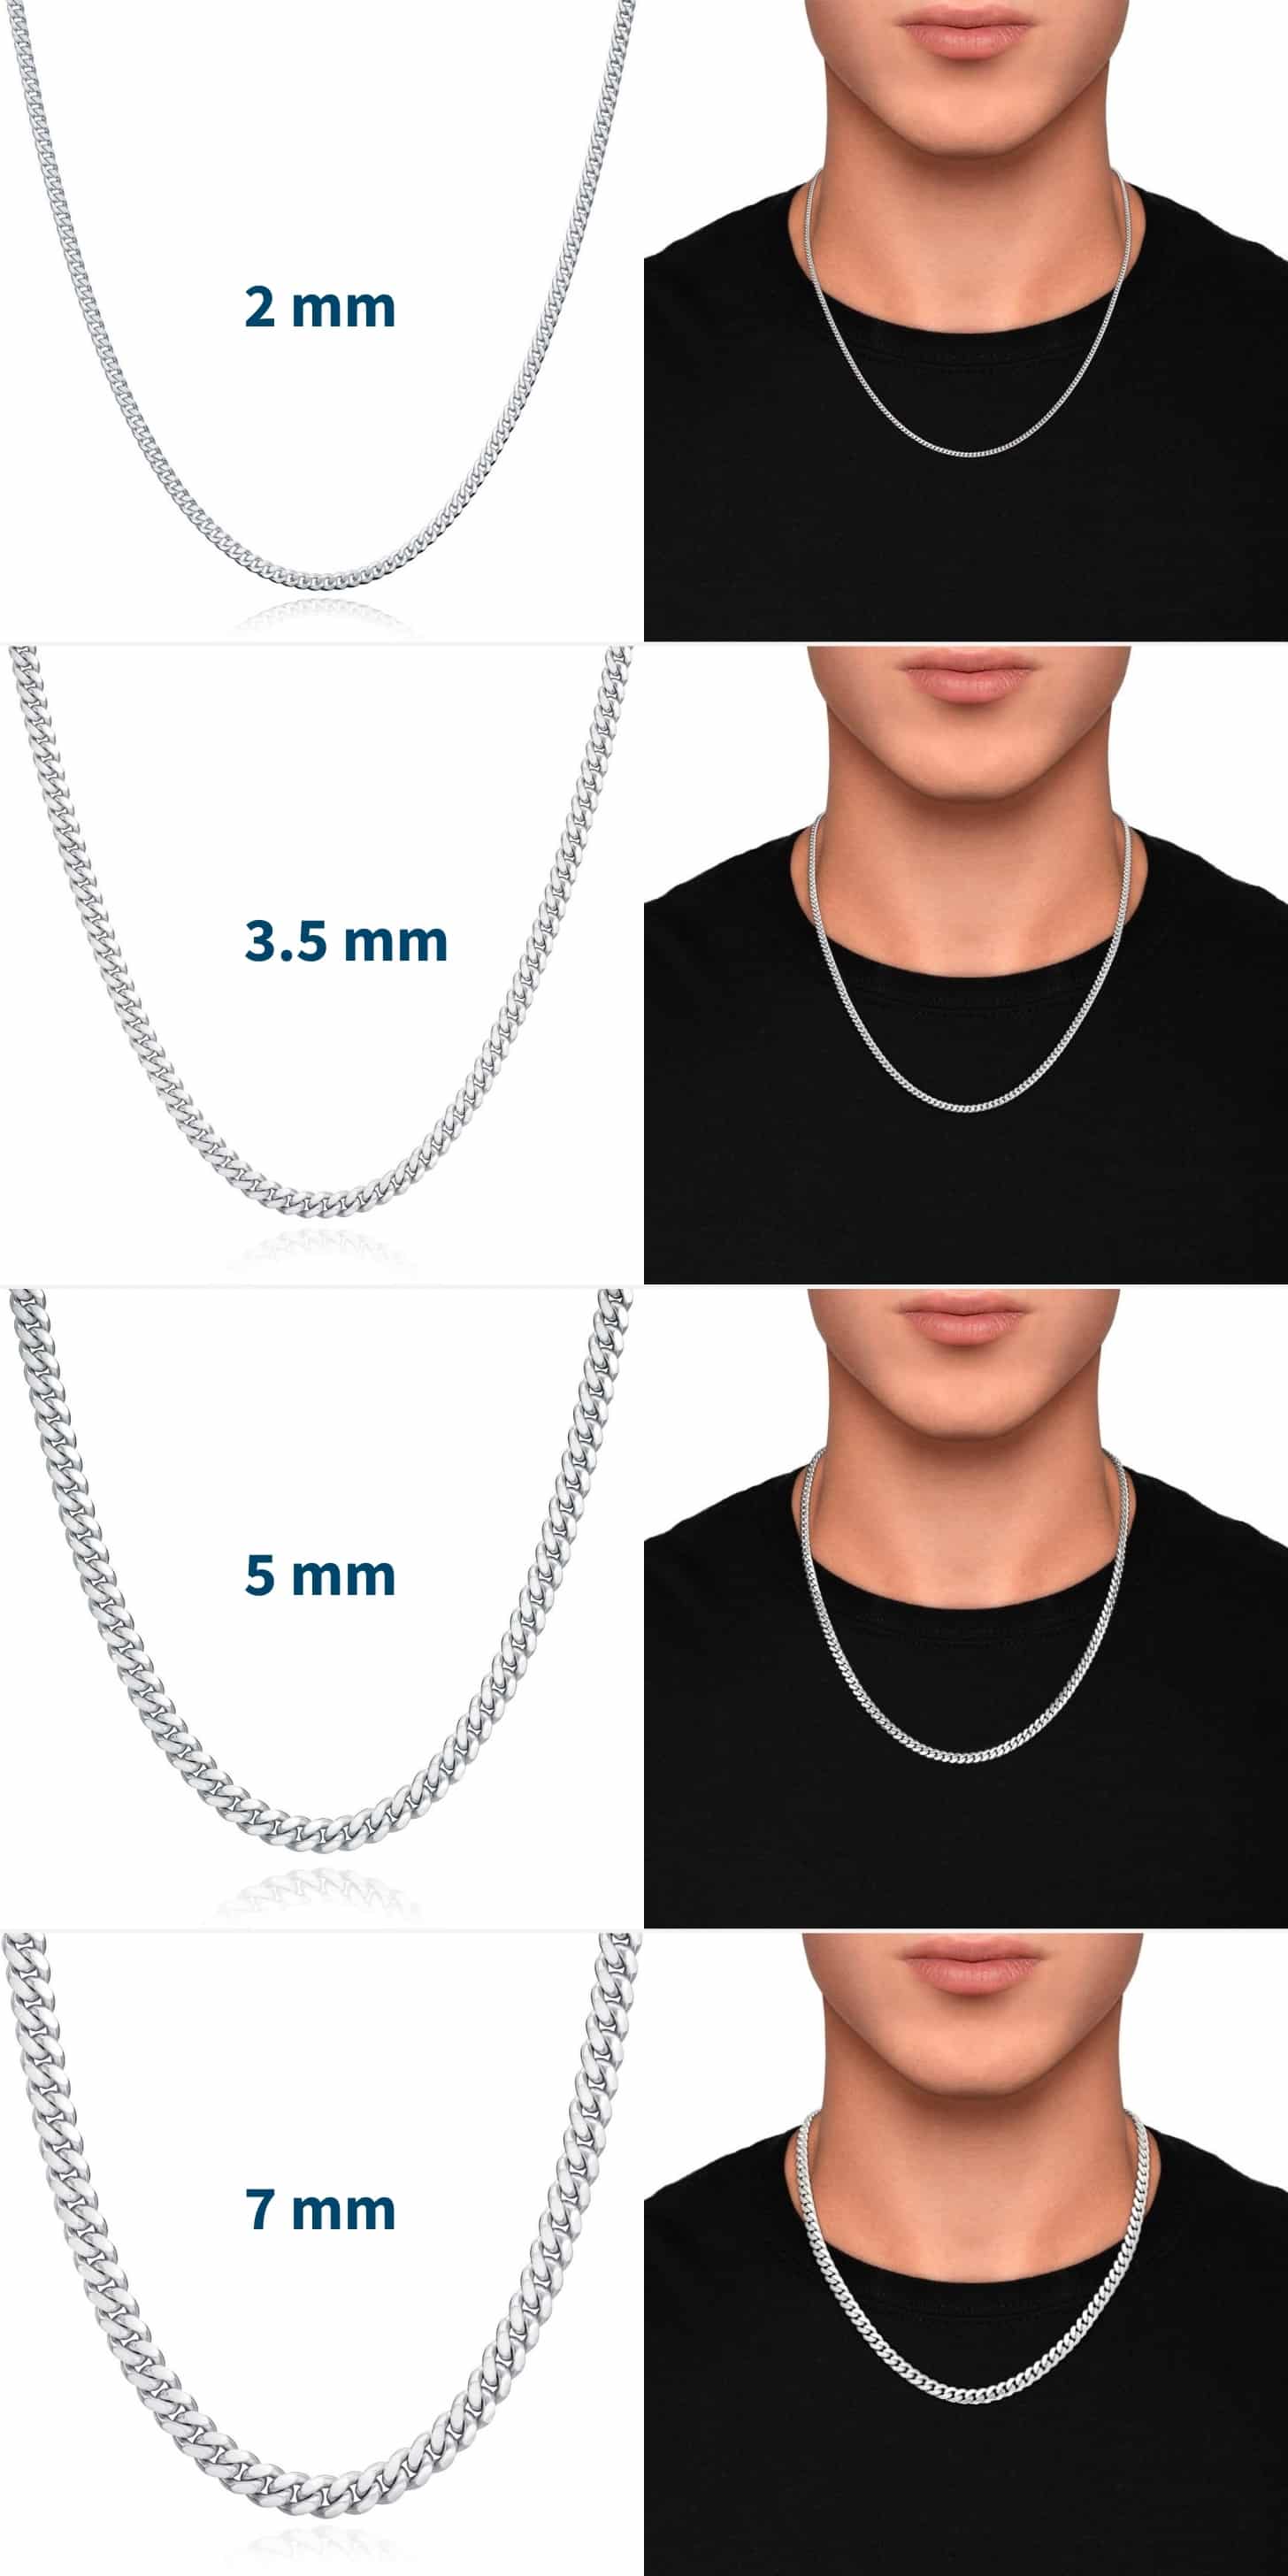 Men's Necklace Lengths Guide  How To Wear A Necklace For Men With